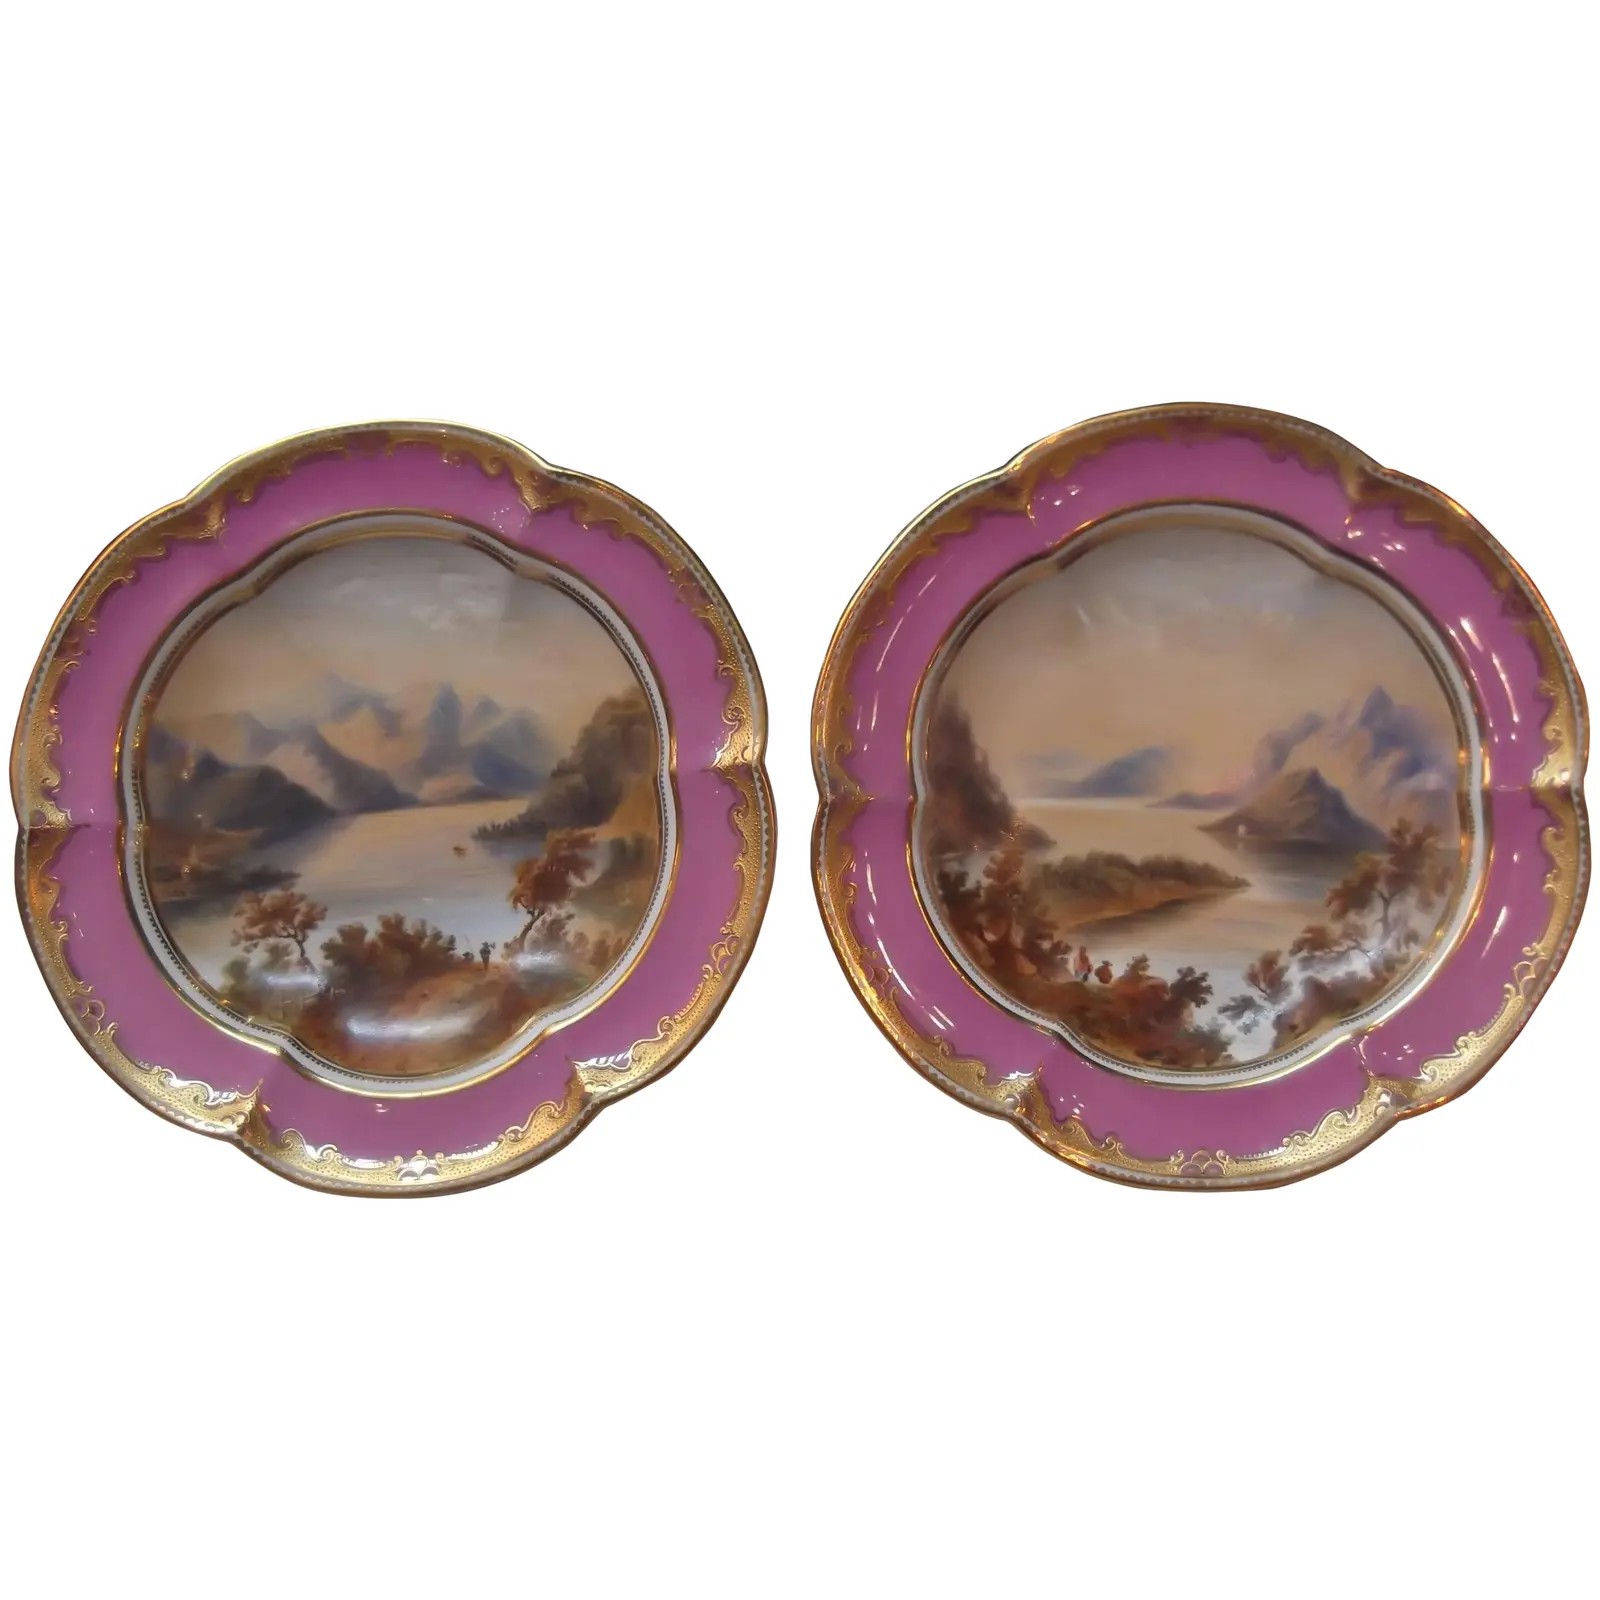 early-19th-century-antique-pair-of-hand-painted-english-compotes-a-pair-8882.webp